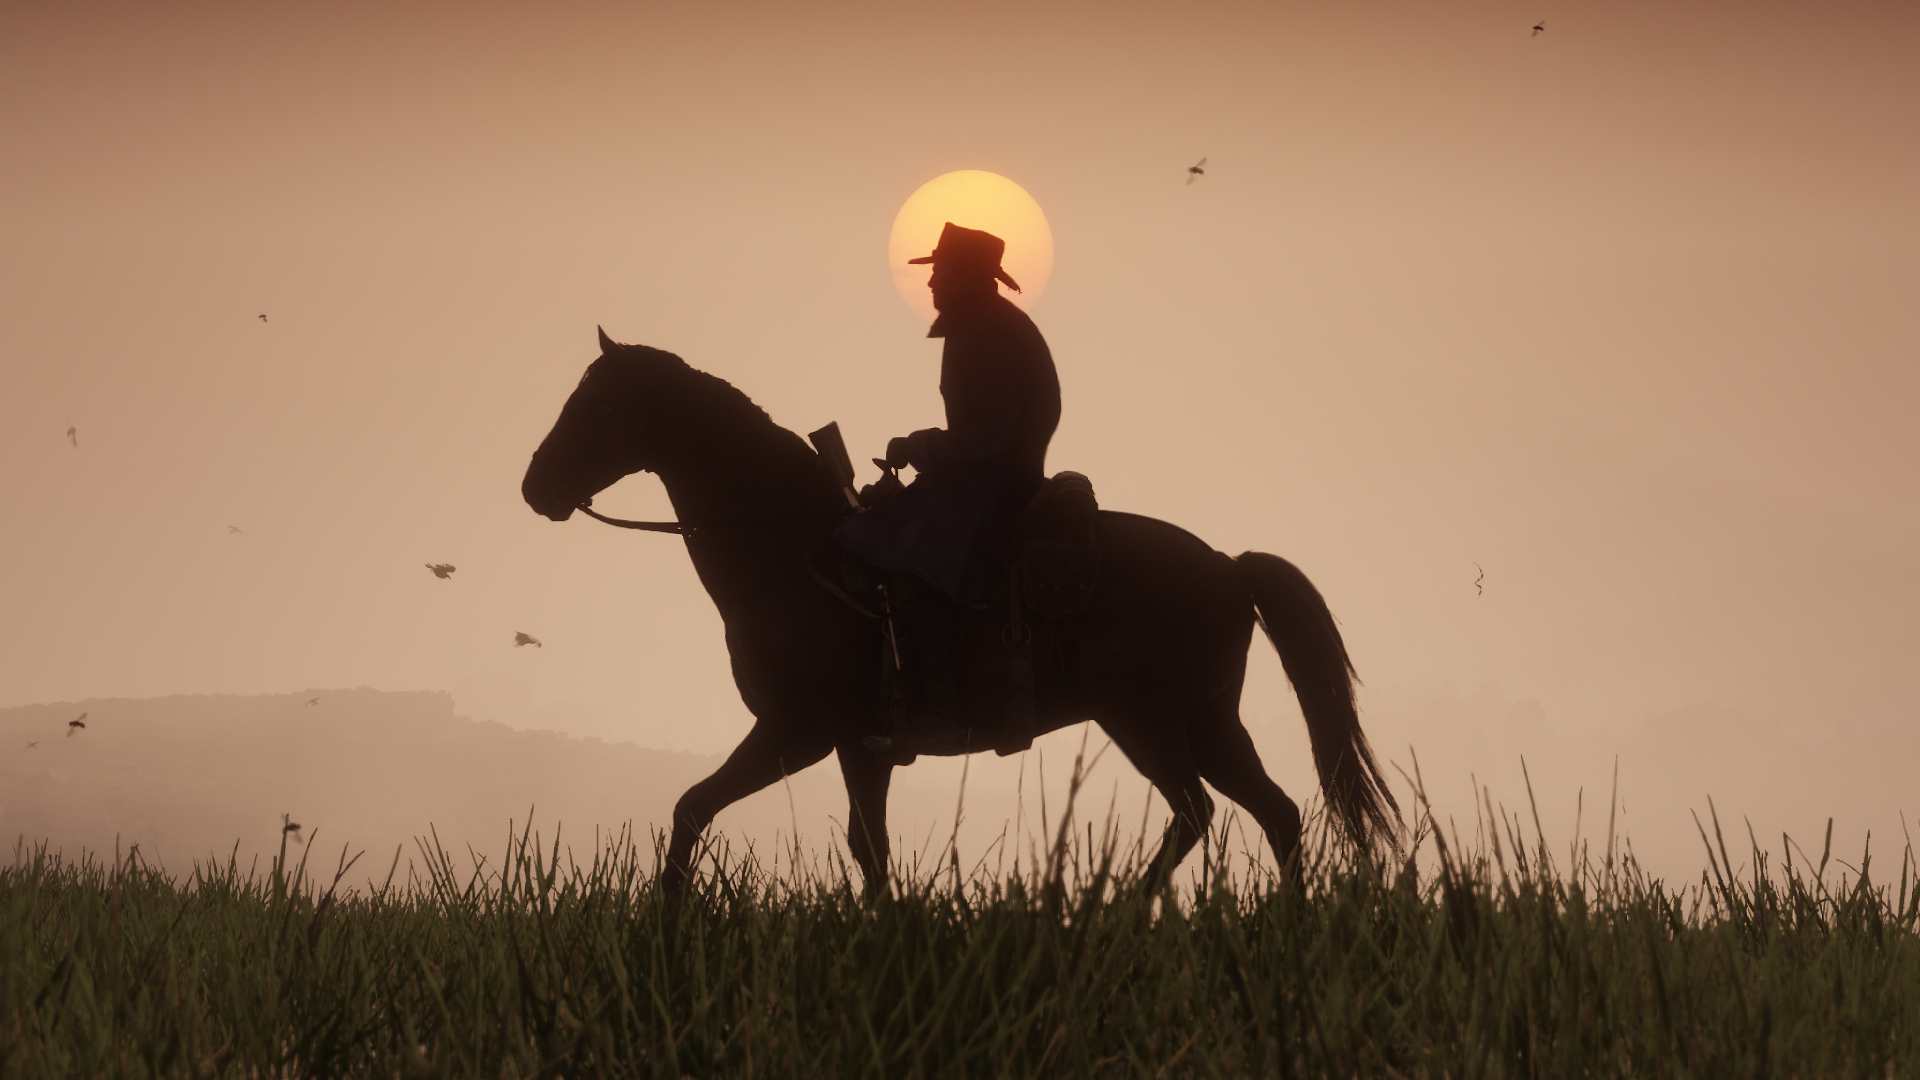 Red Dead Redemption 2_05